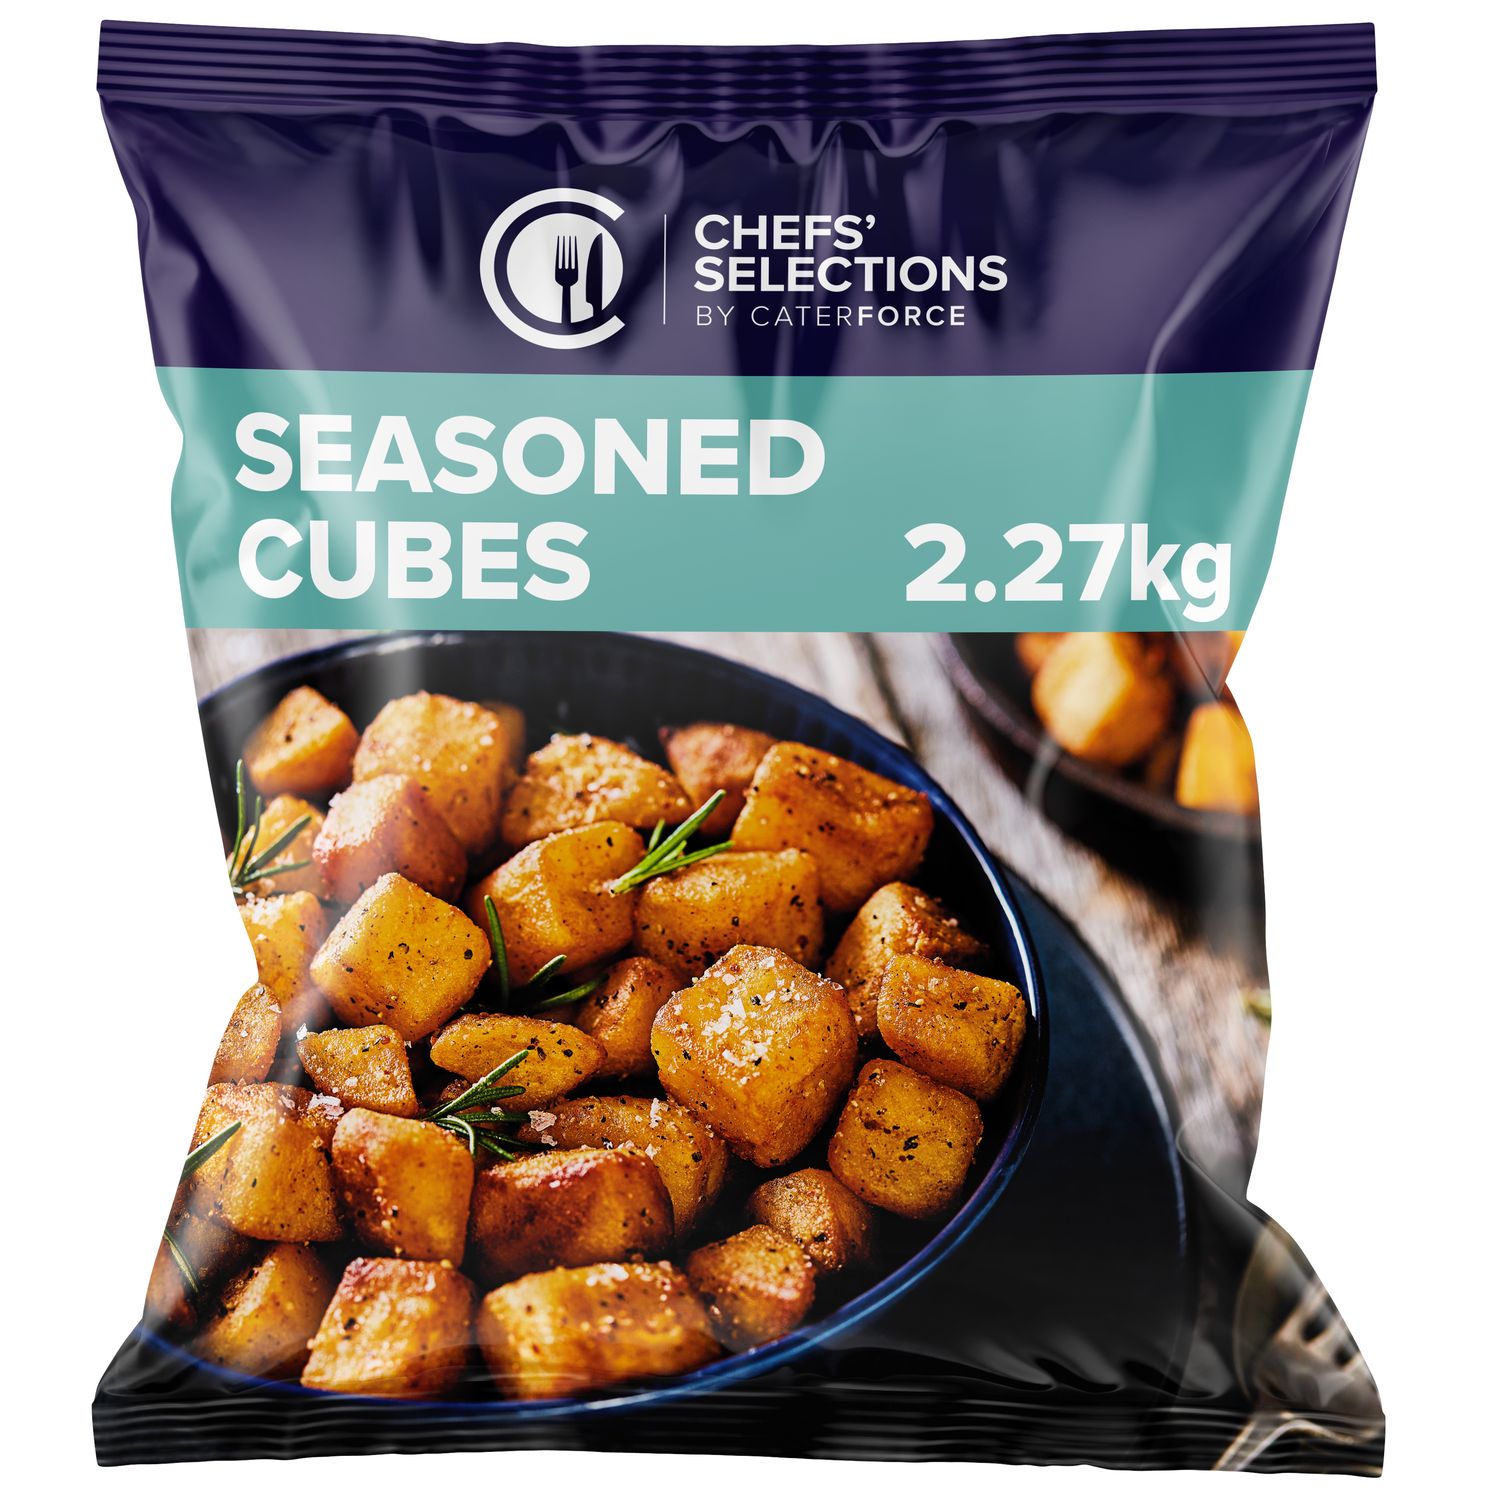 Chefs’ Selections Seasoned Cubes (4 x 2.27kg)